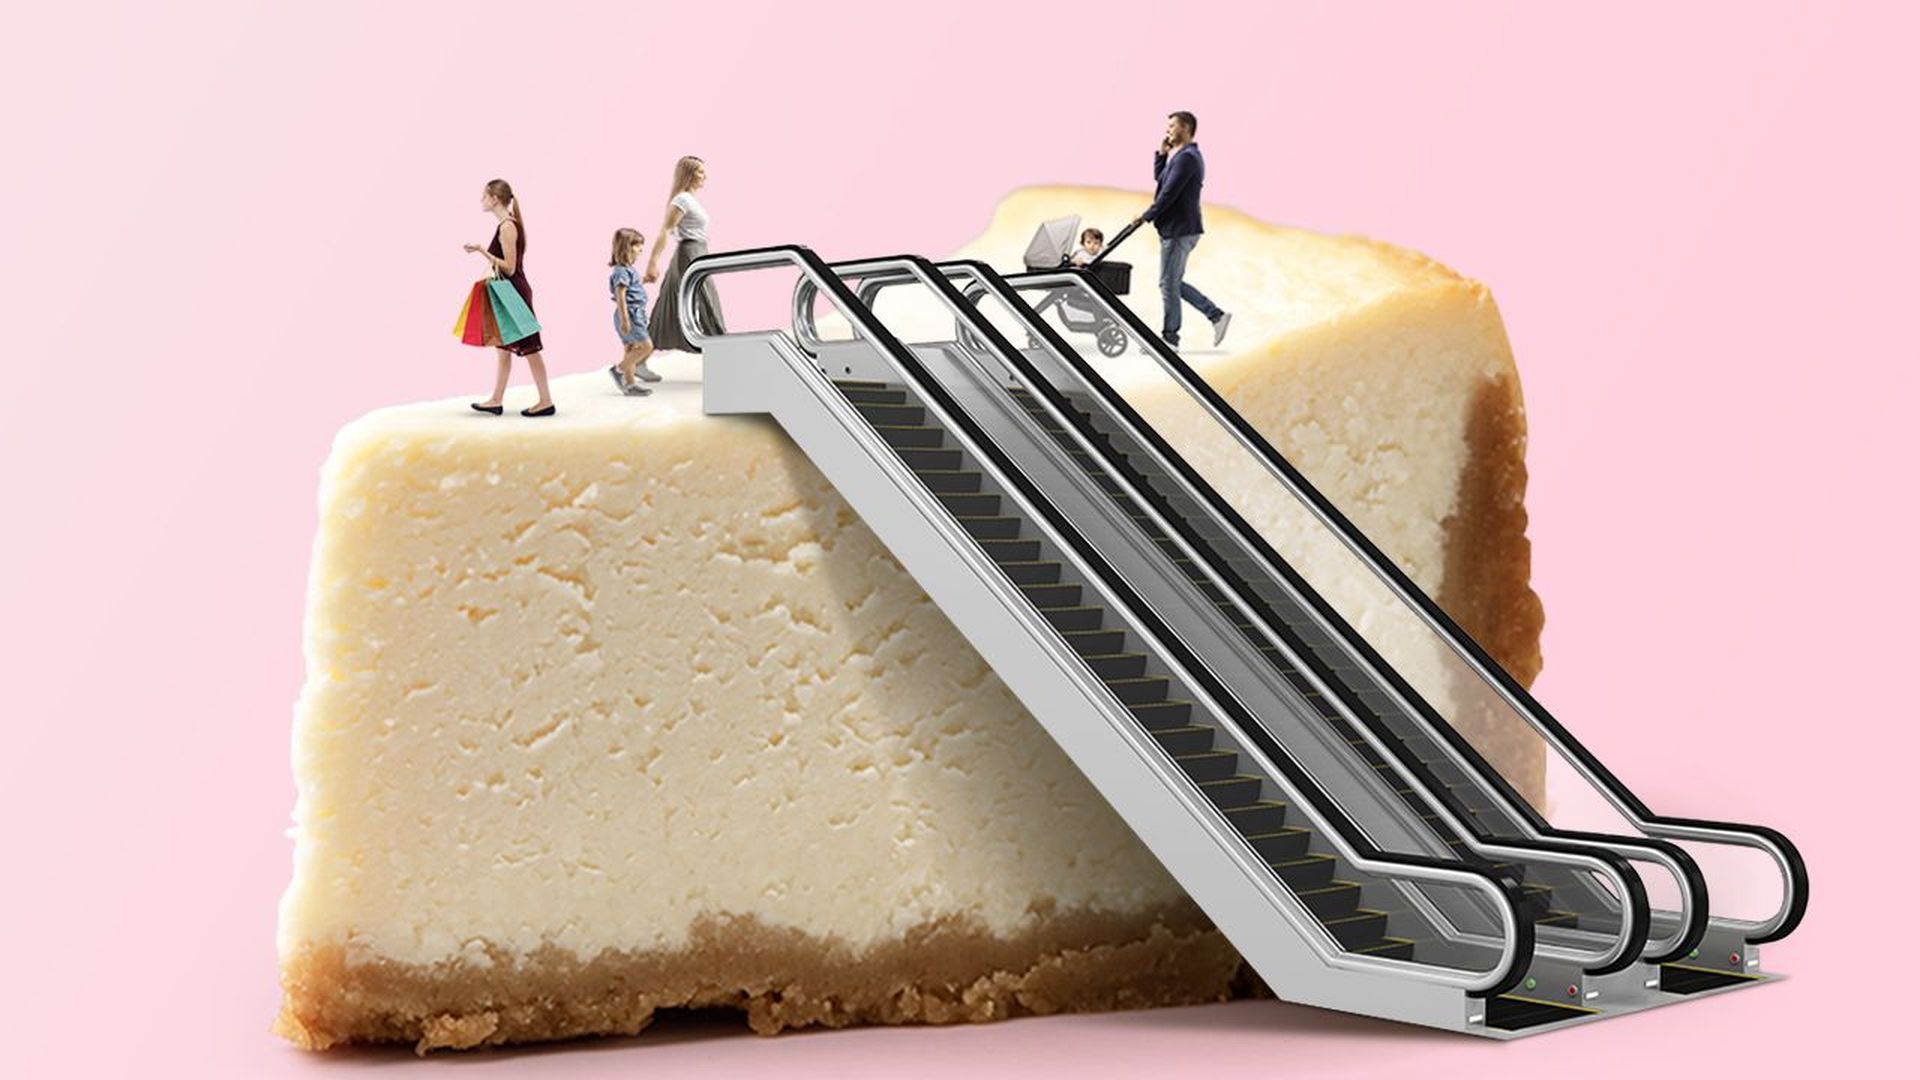 Illustration of a slice of cheesecake with an escalator leading to the top where tiny shoppers are walking around